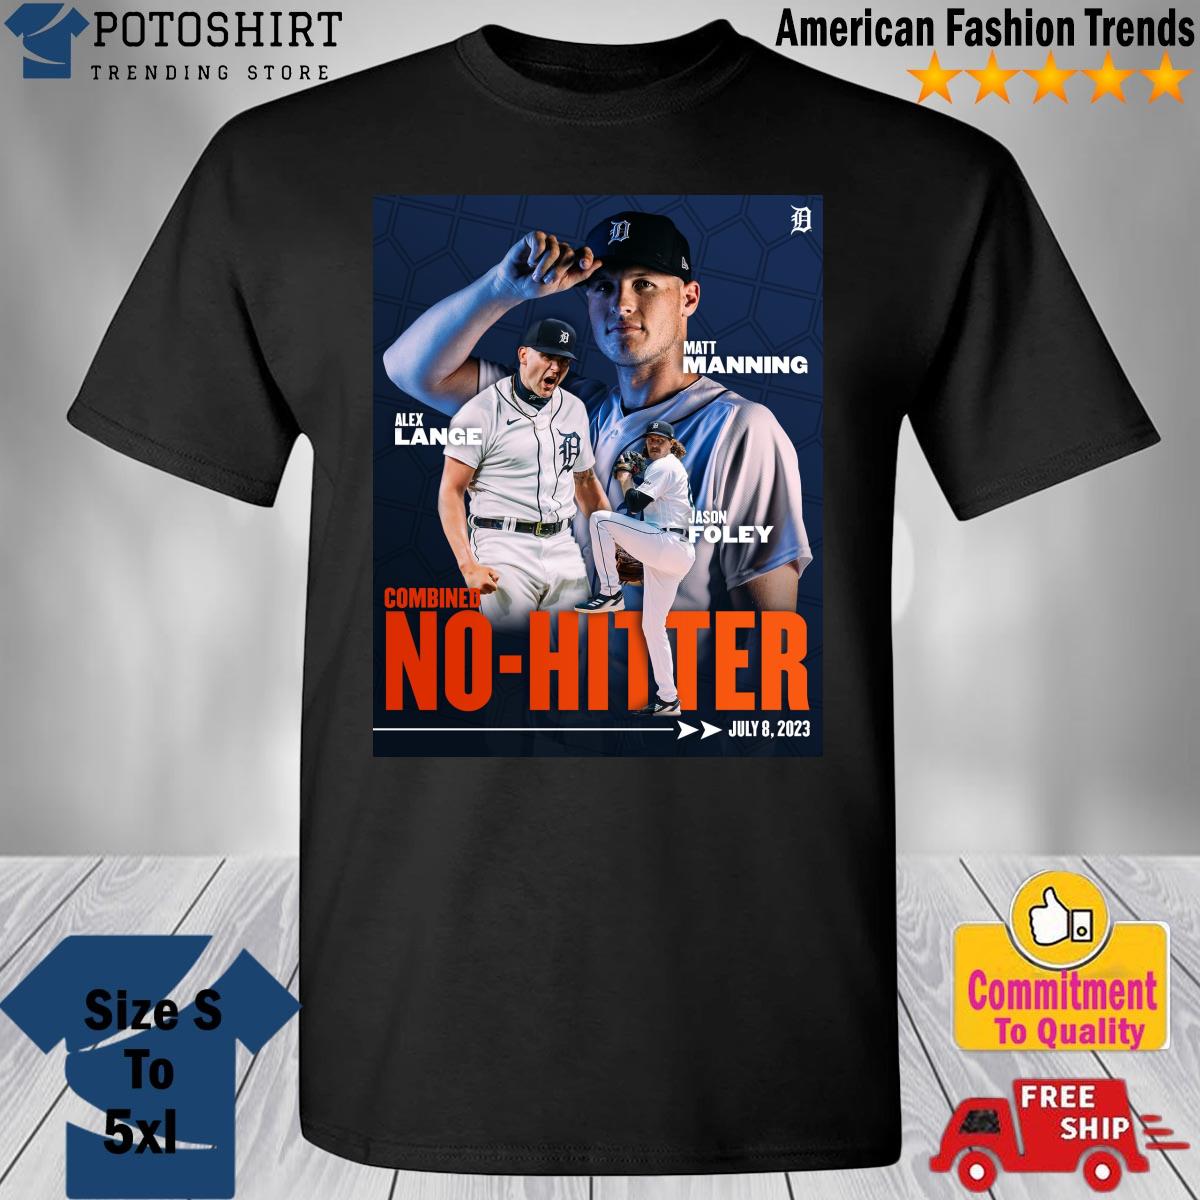 How About That, Detroit Combined No-Hitter Shirt